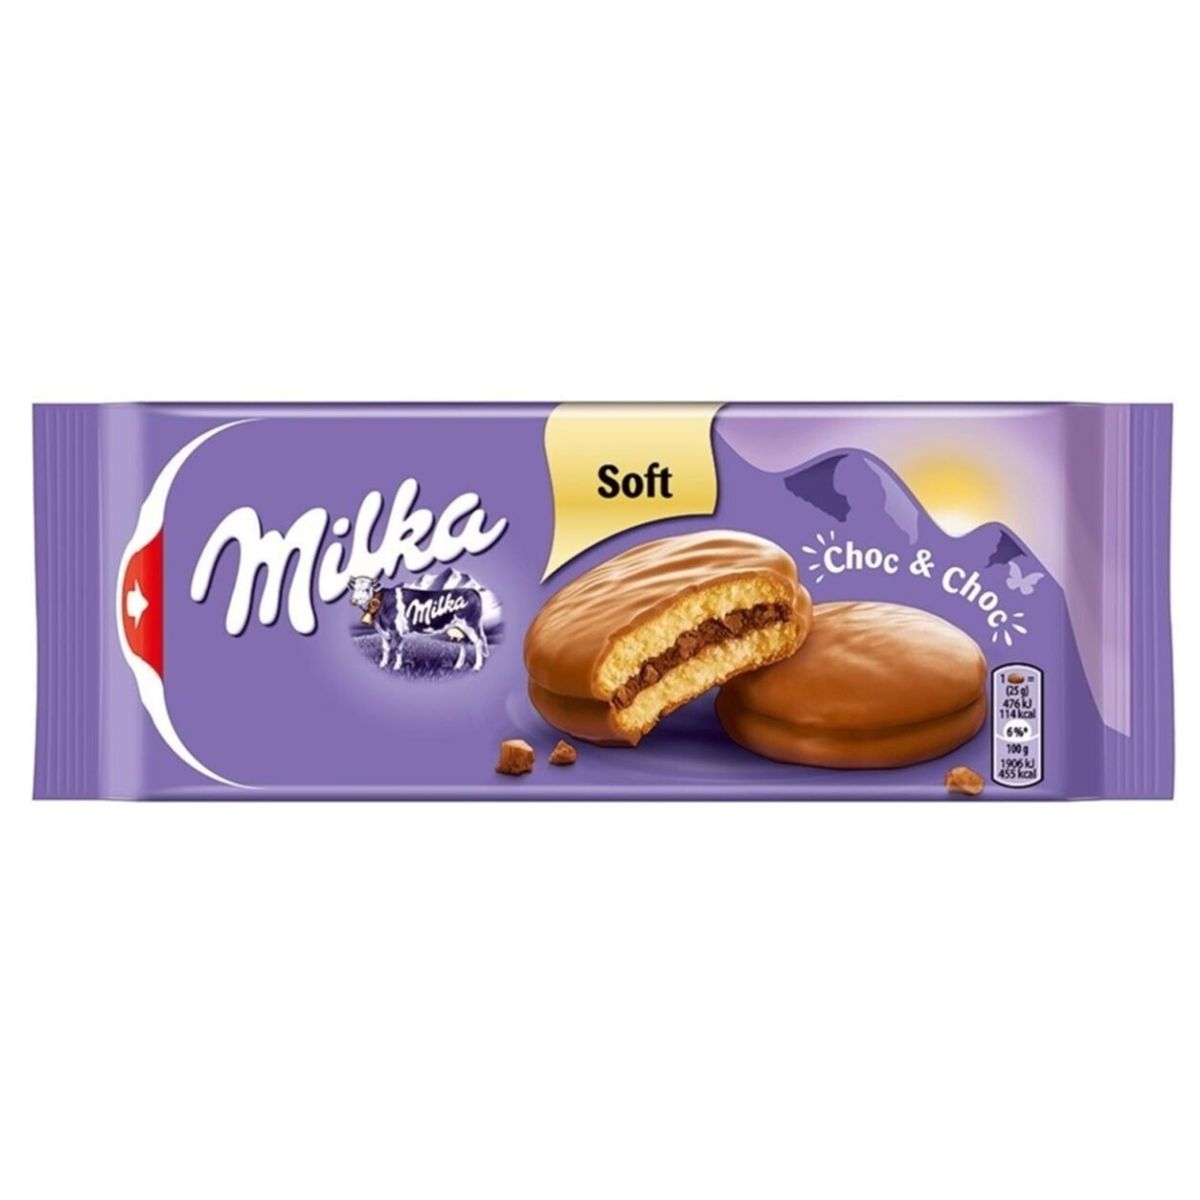 A package of Milka - Choc & Choc Sponge Cakes - 150g with a chocolate filling.